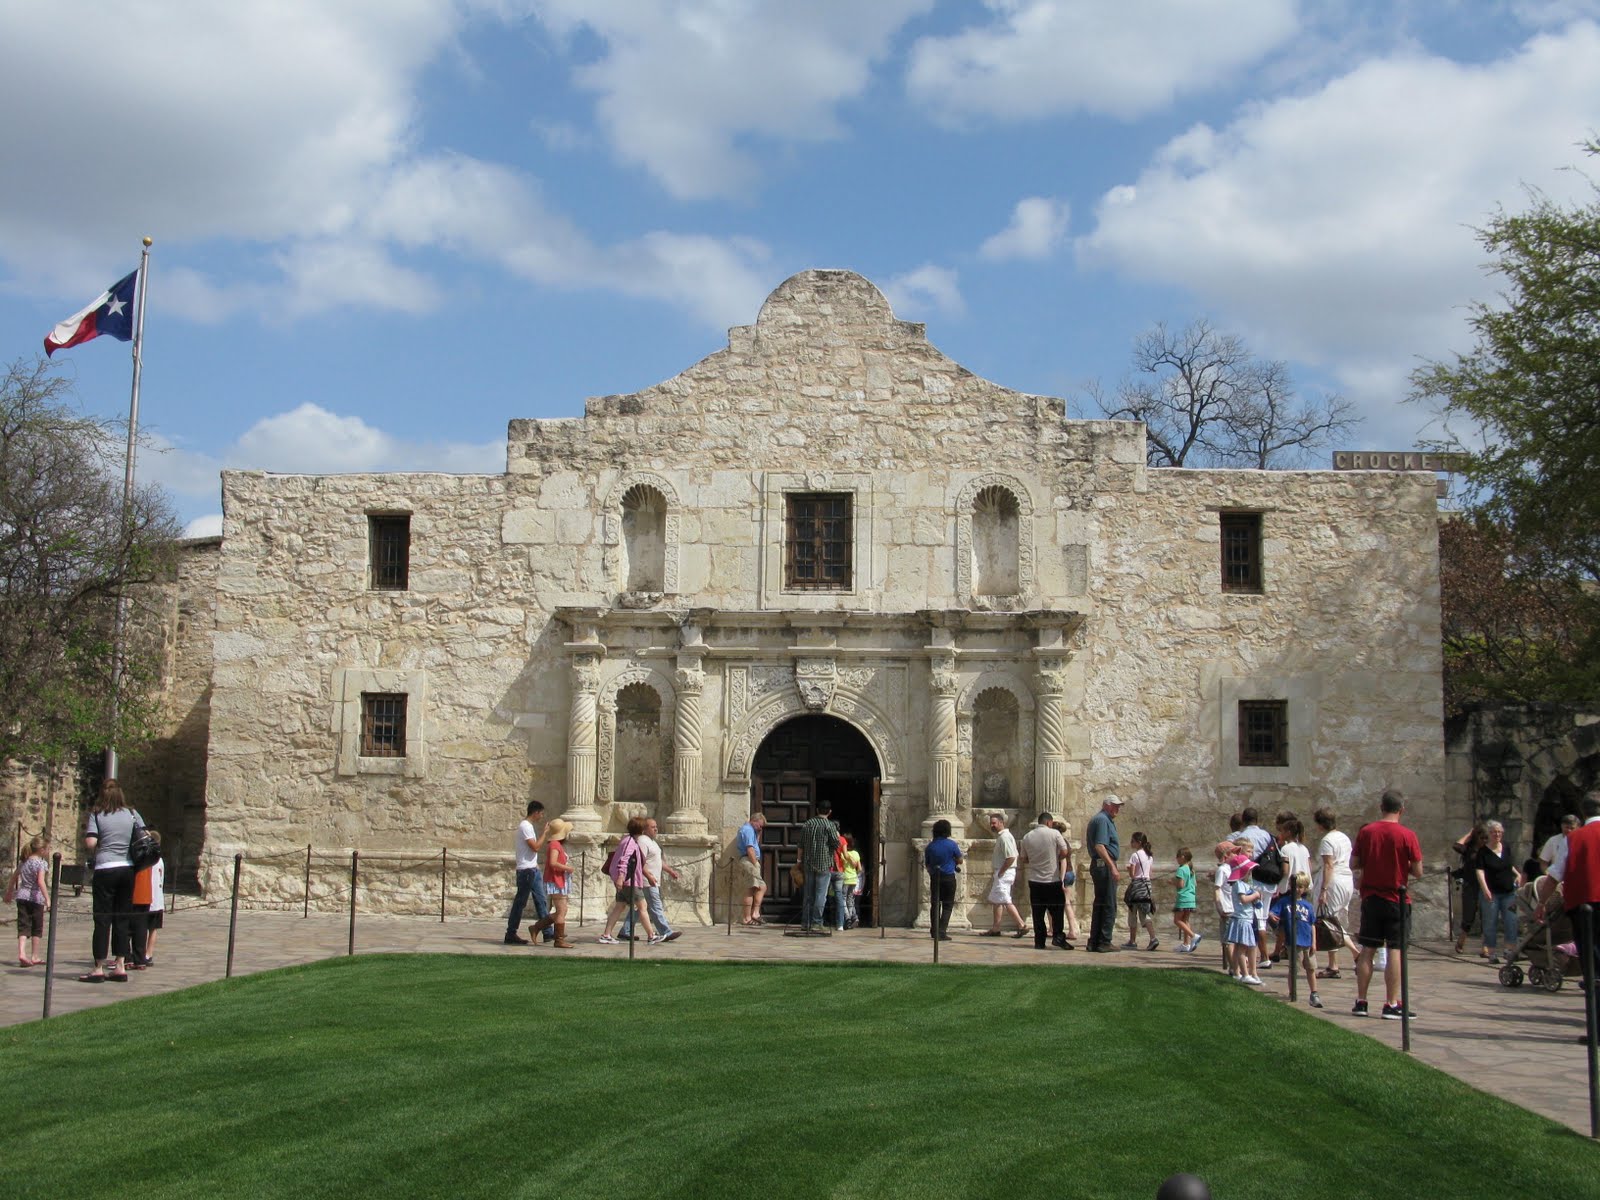 The+alamo+soldiers